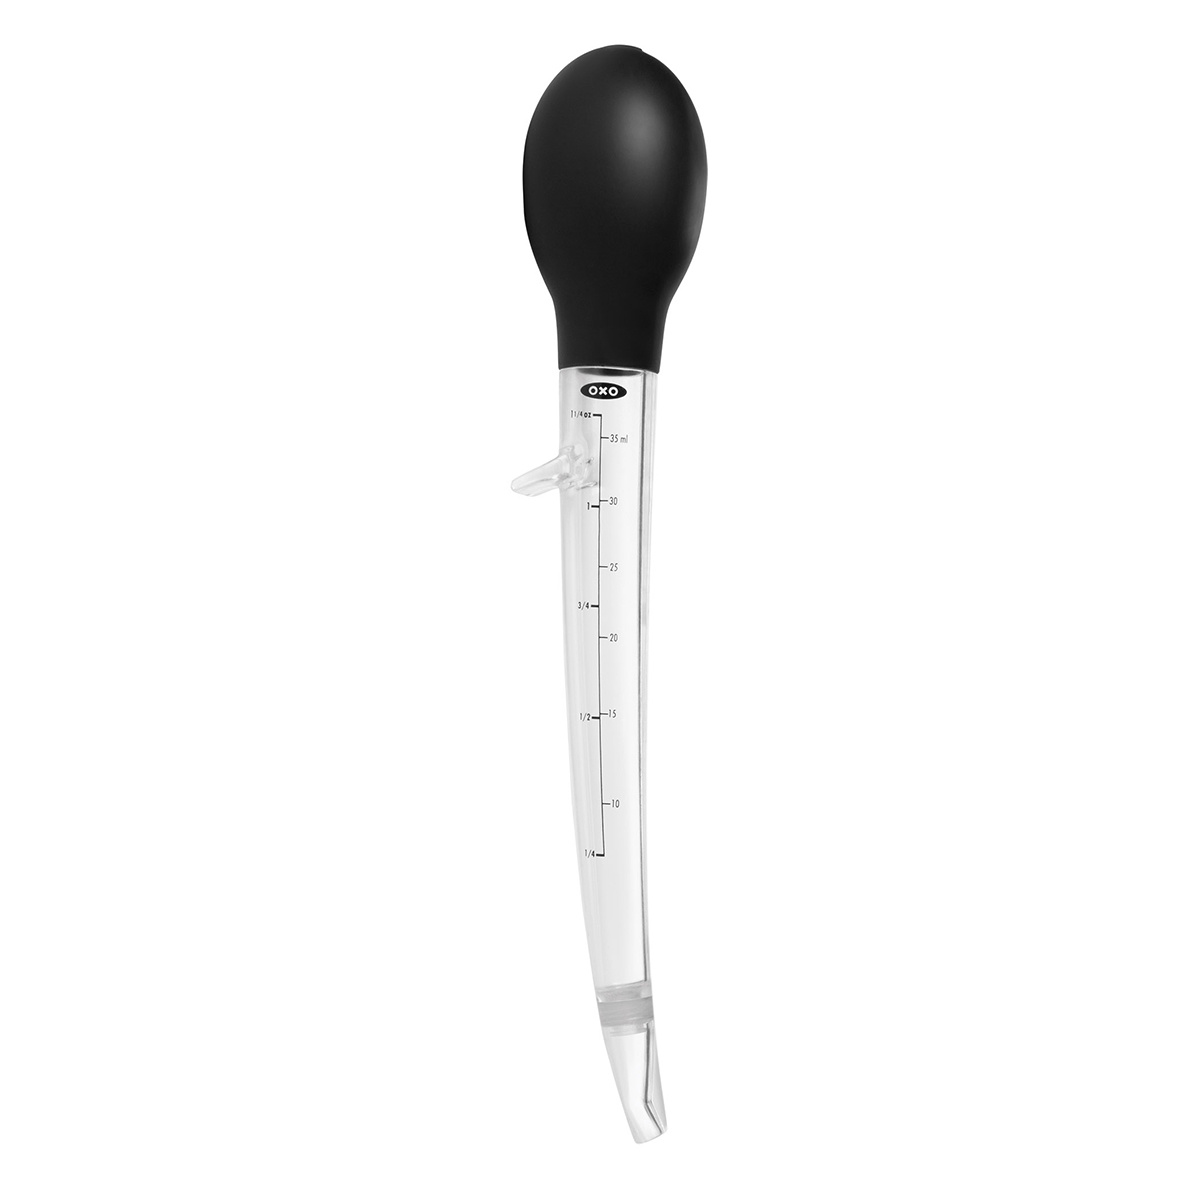 Oxo Turkey Baster - Red - MyToque